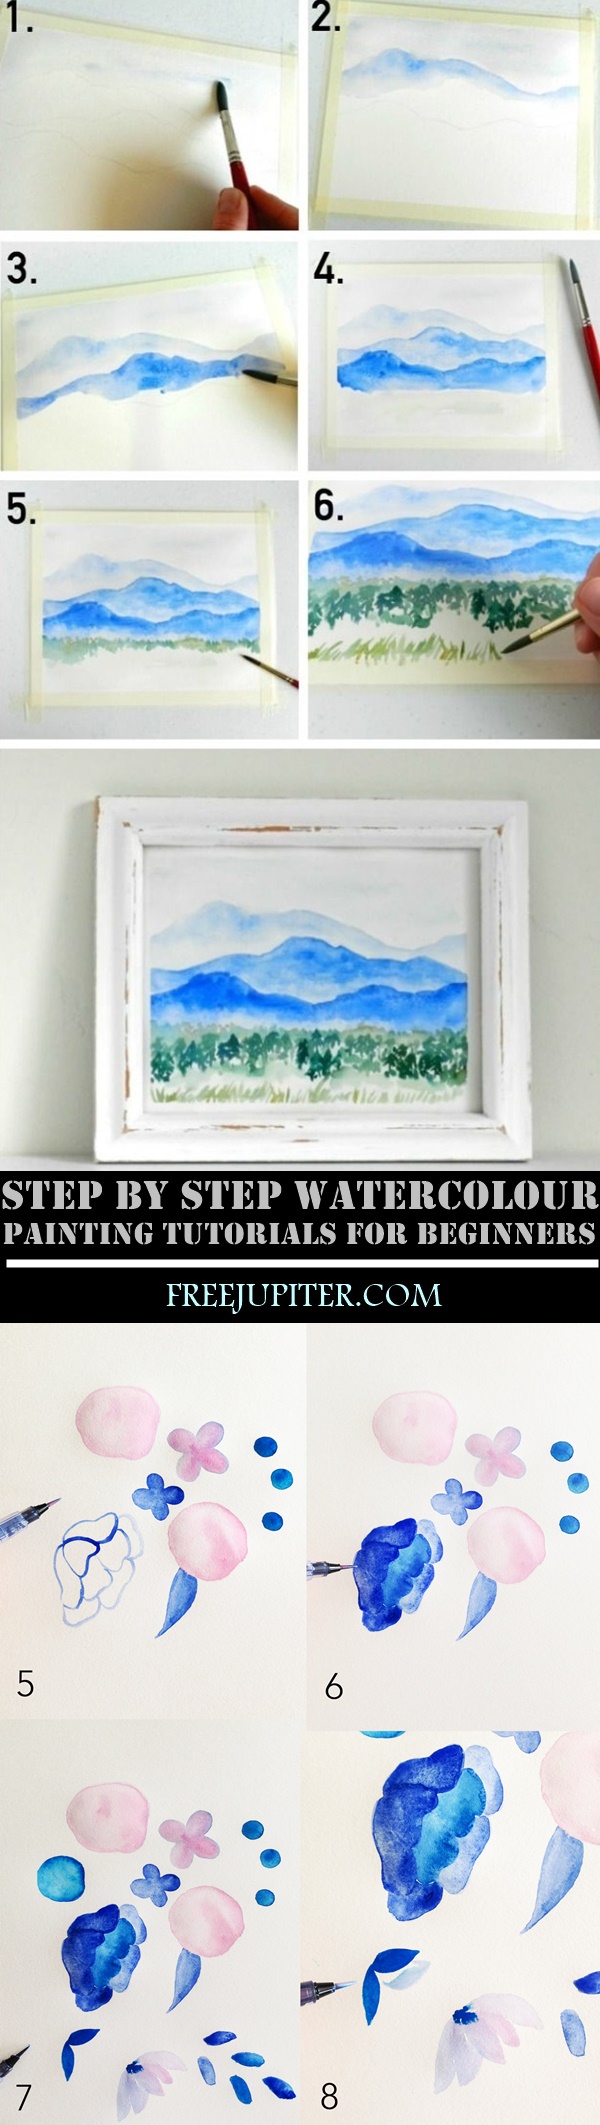 35 Step By Step Watercolour Painting Tutorials For Beginners